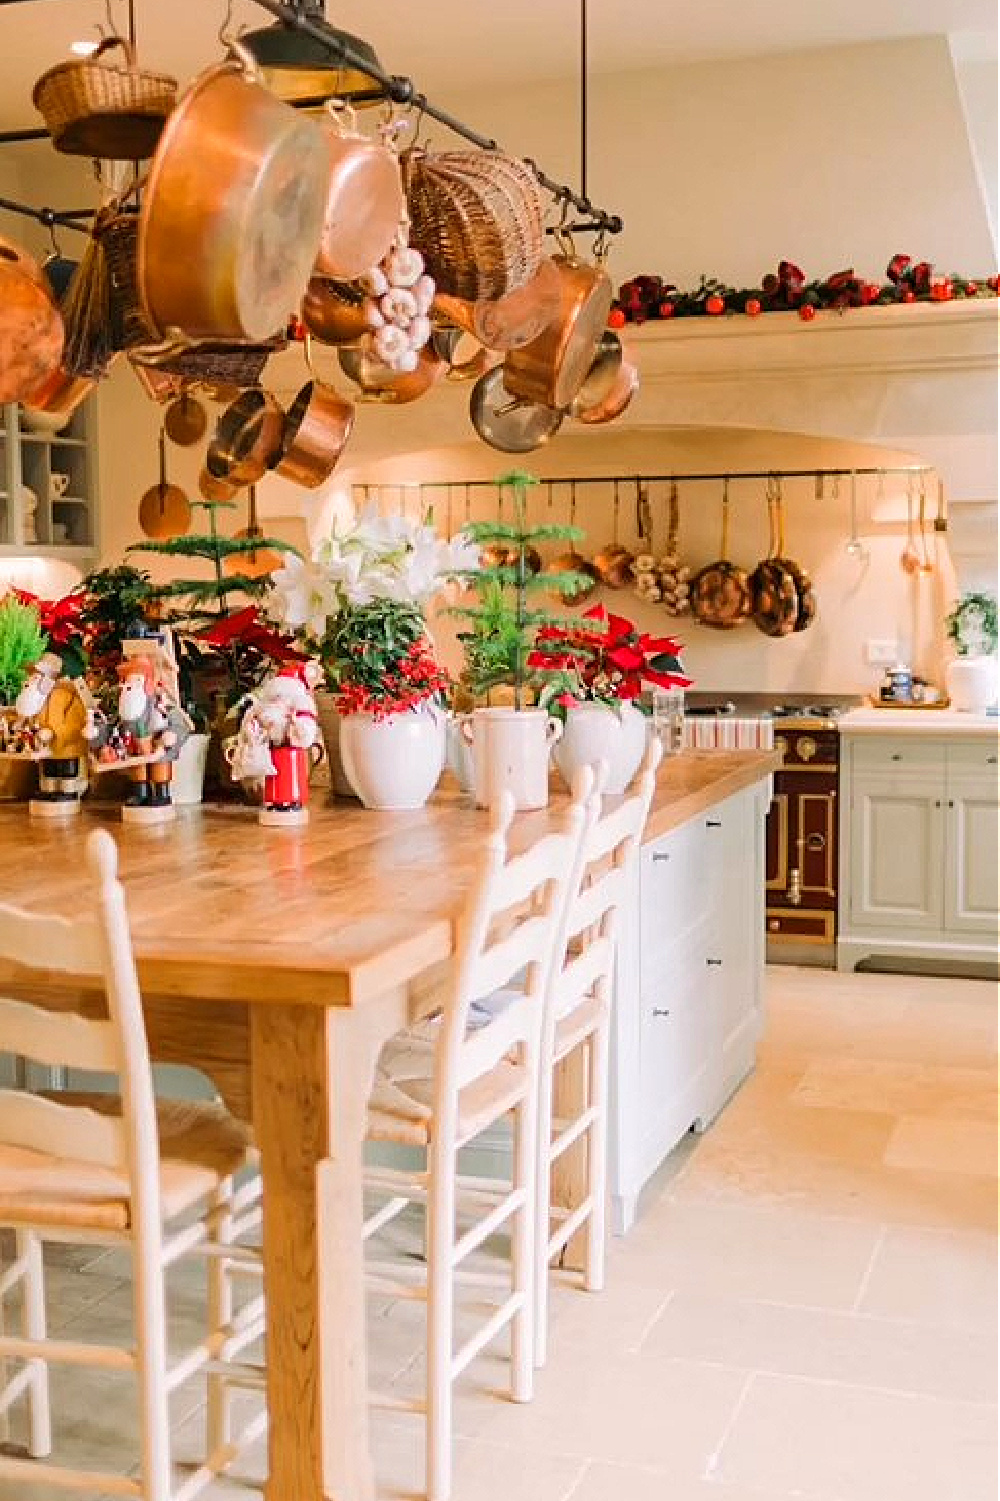 Beautiful French kitchen at Christmas with copper pots and pops of red - @provencepoiriers. #frenchchristmas